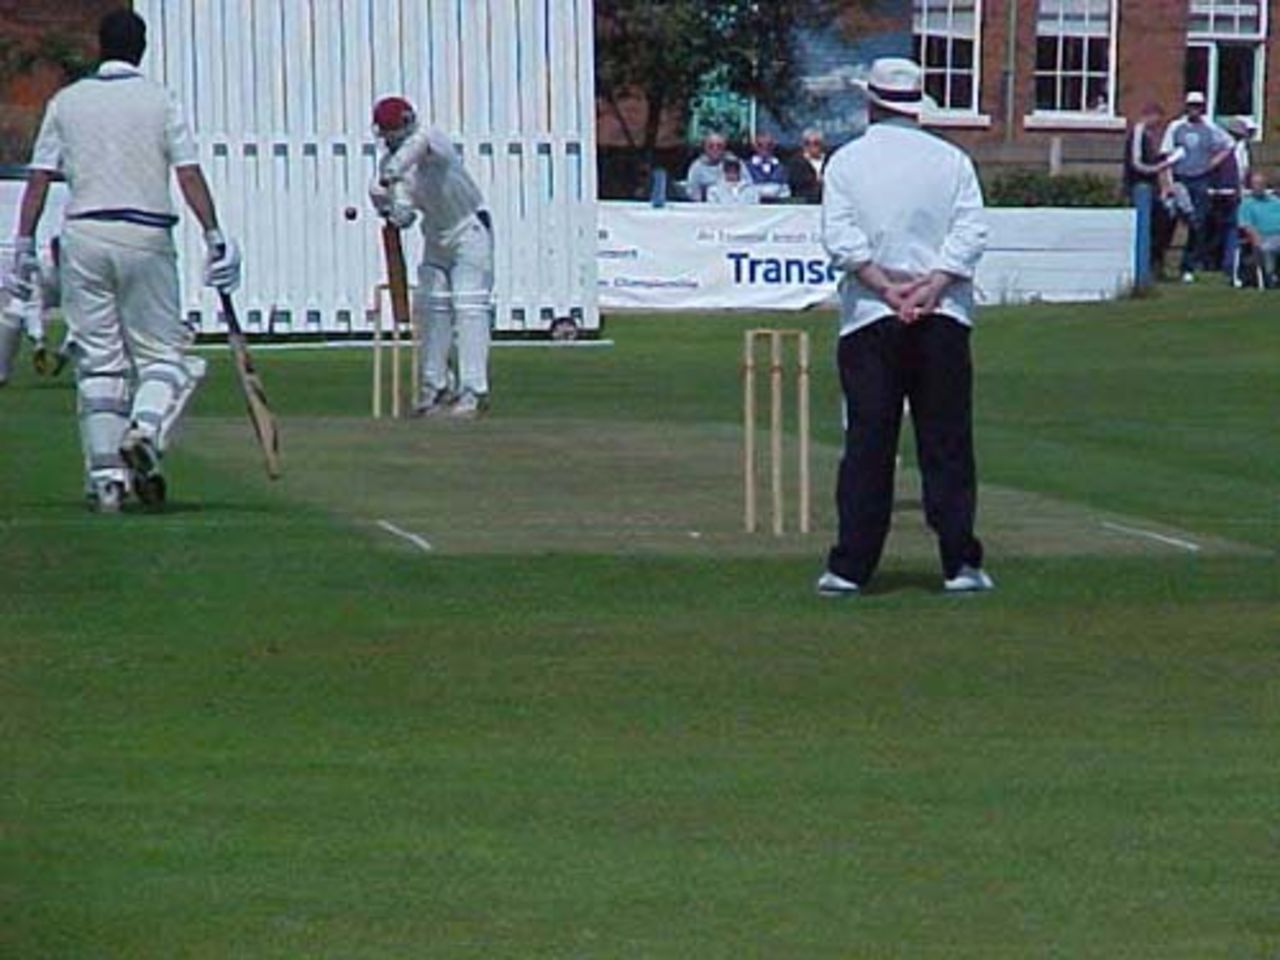 Ramsbottom's Mick Haslam bowled a lively opening spell to Peter Thompson